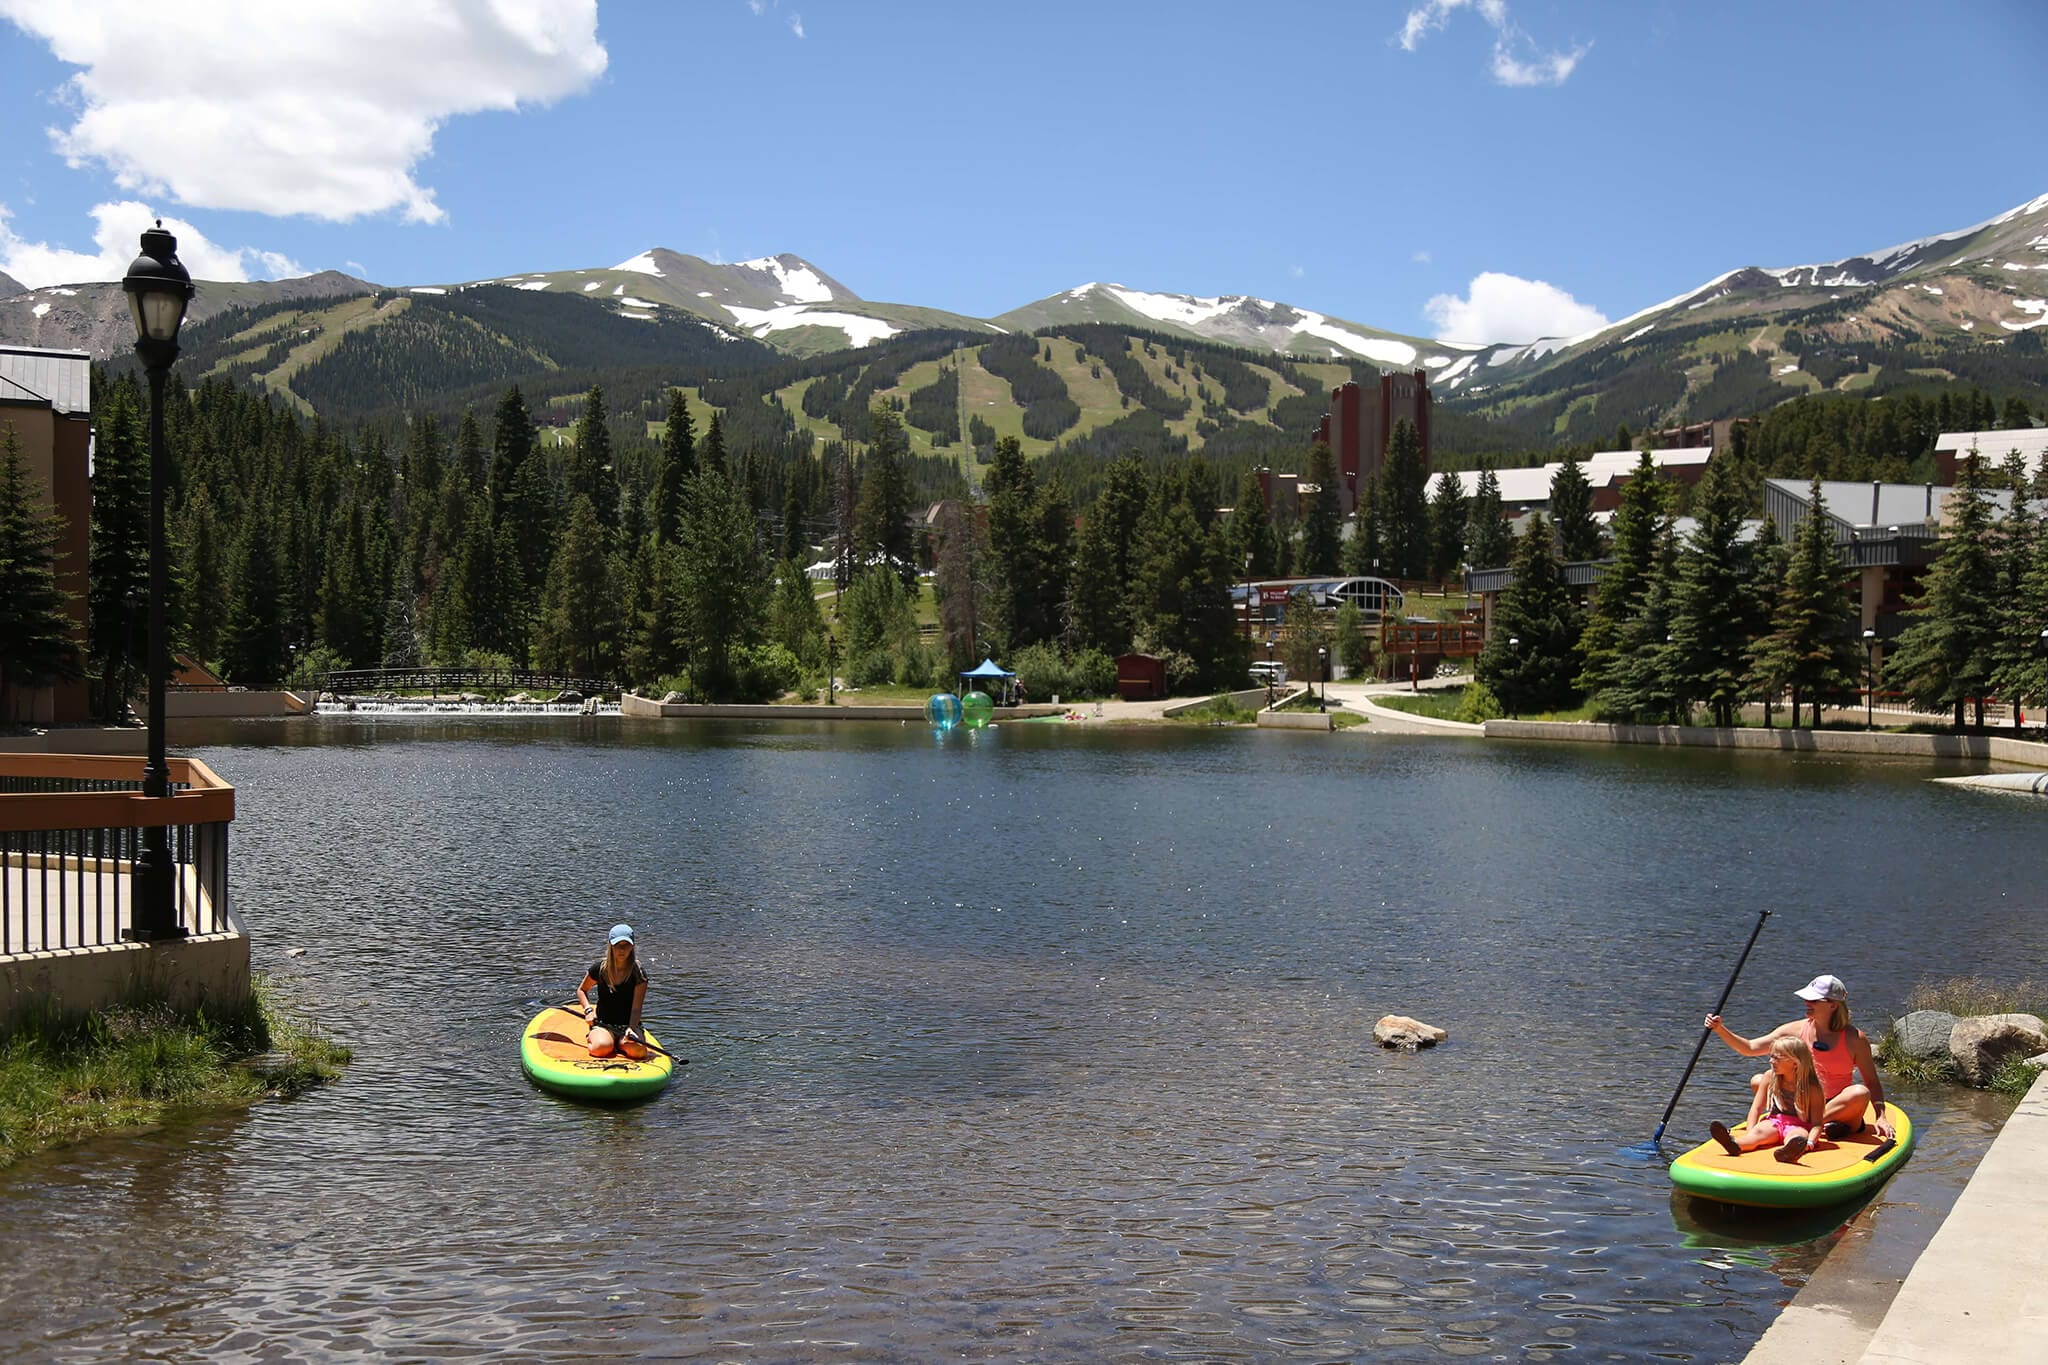 Paddleboarders on Maggie Pond in Breckenridge